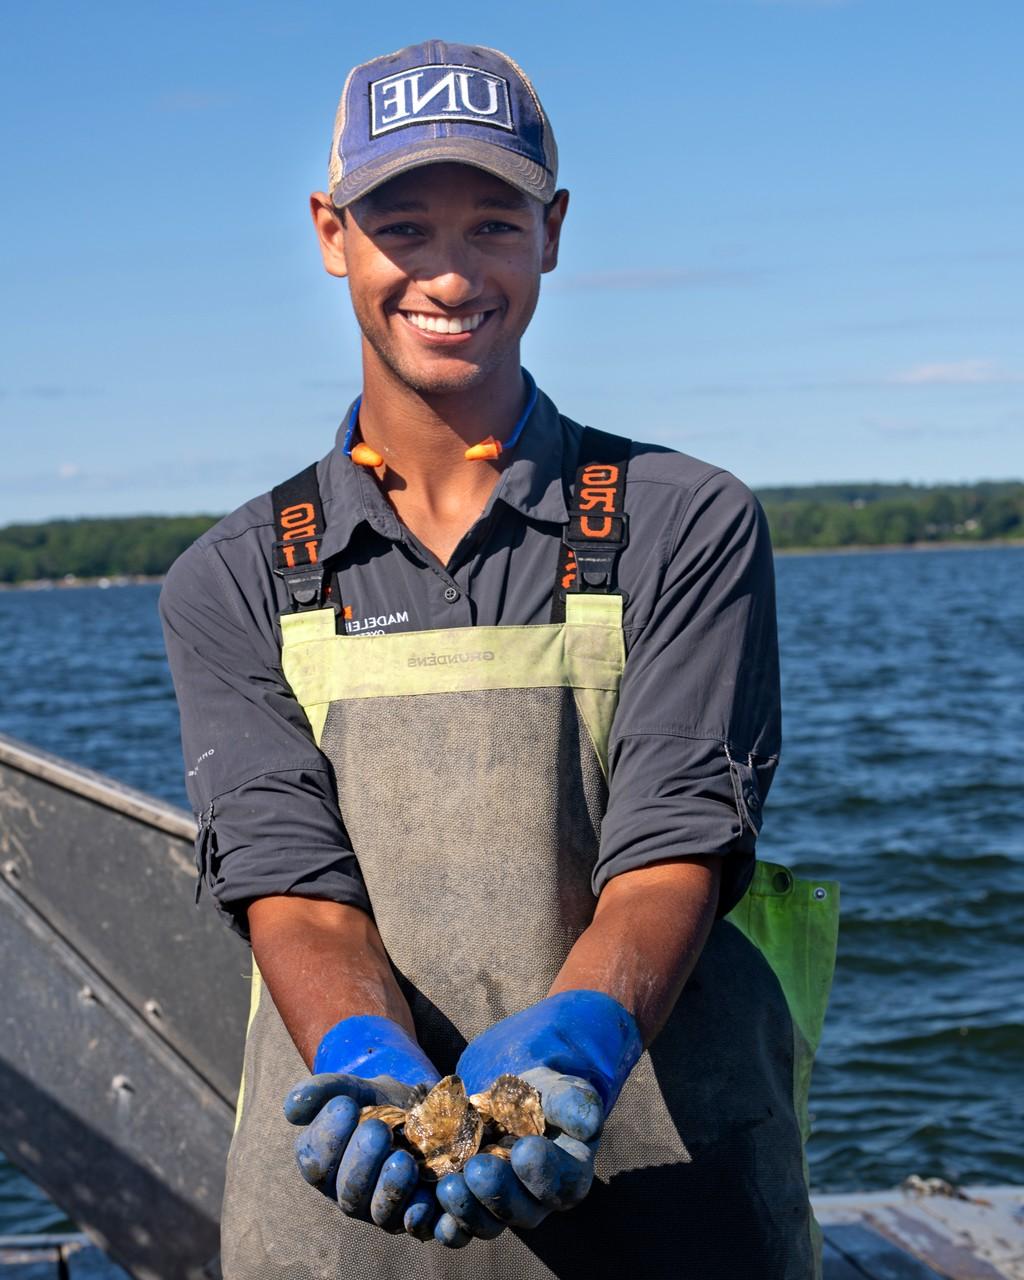 A student wearing a U N E baseball hat and waders shows off several oysters in their hands